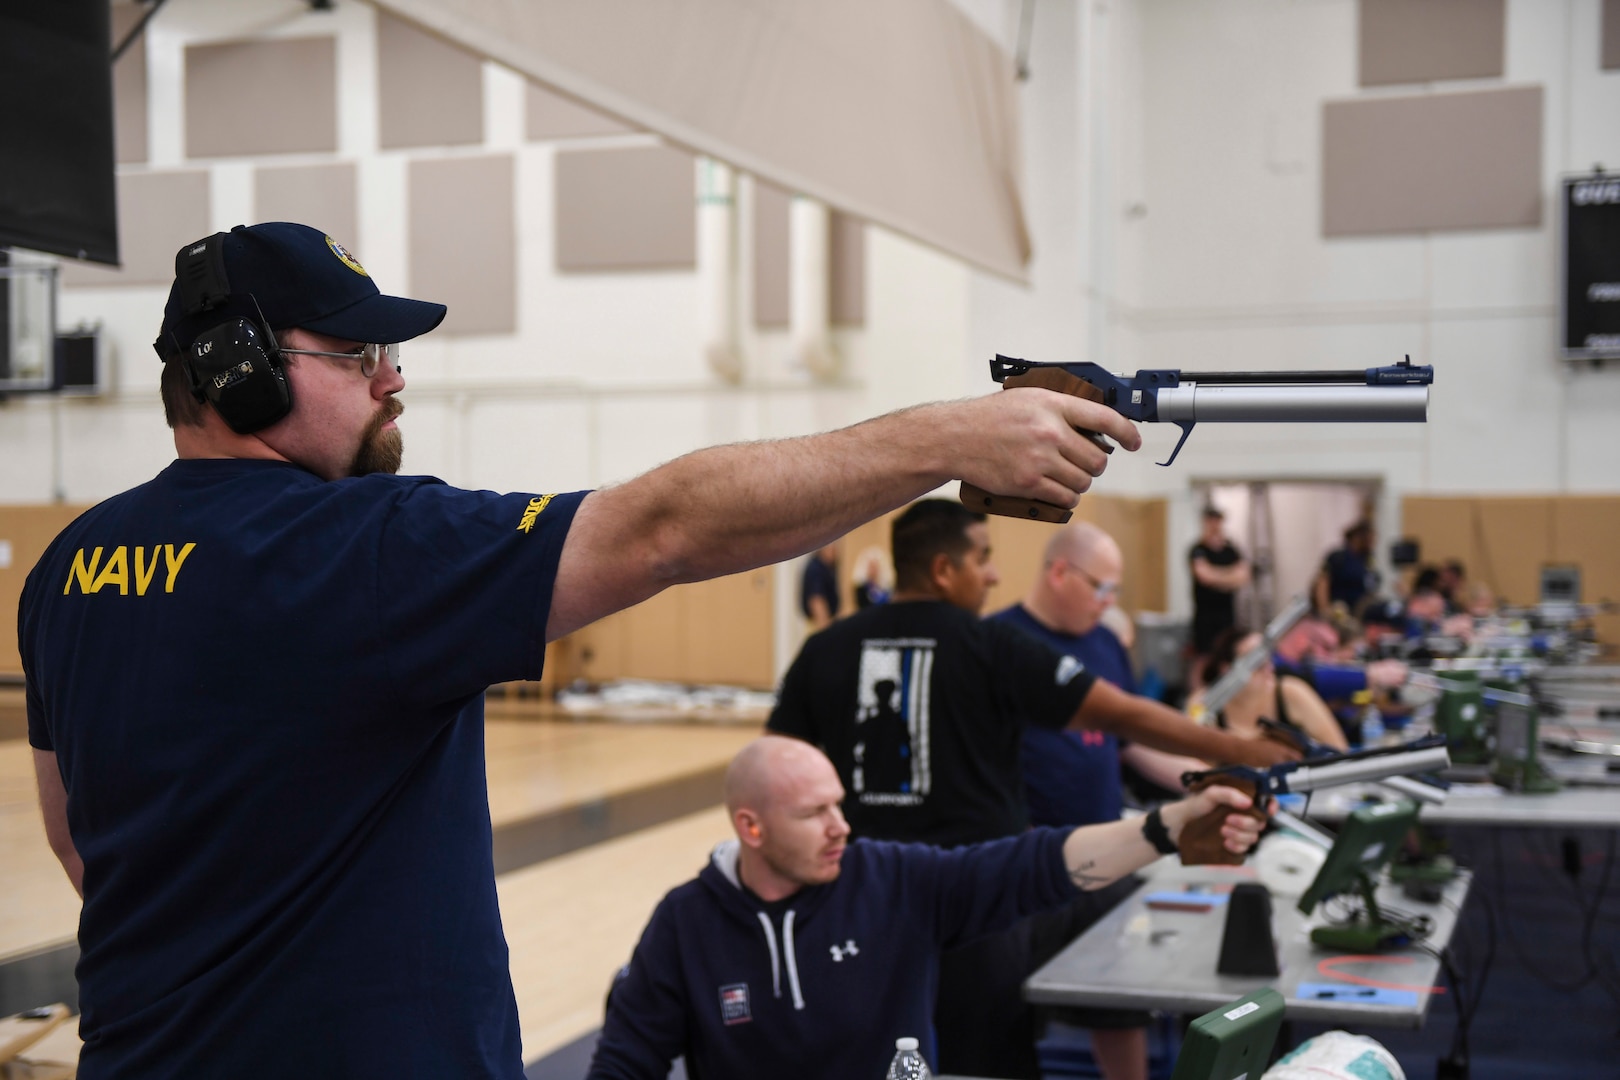 Bill Longworth competes in the shooting portion of the Team Navy Trials at Naval Station (NAVSTA) Mayport's fitness center in preparation for the 2018 Department of Defense Warrior Games